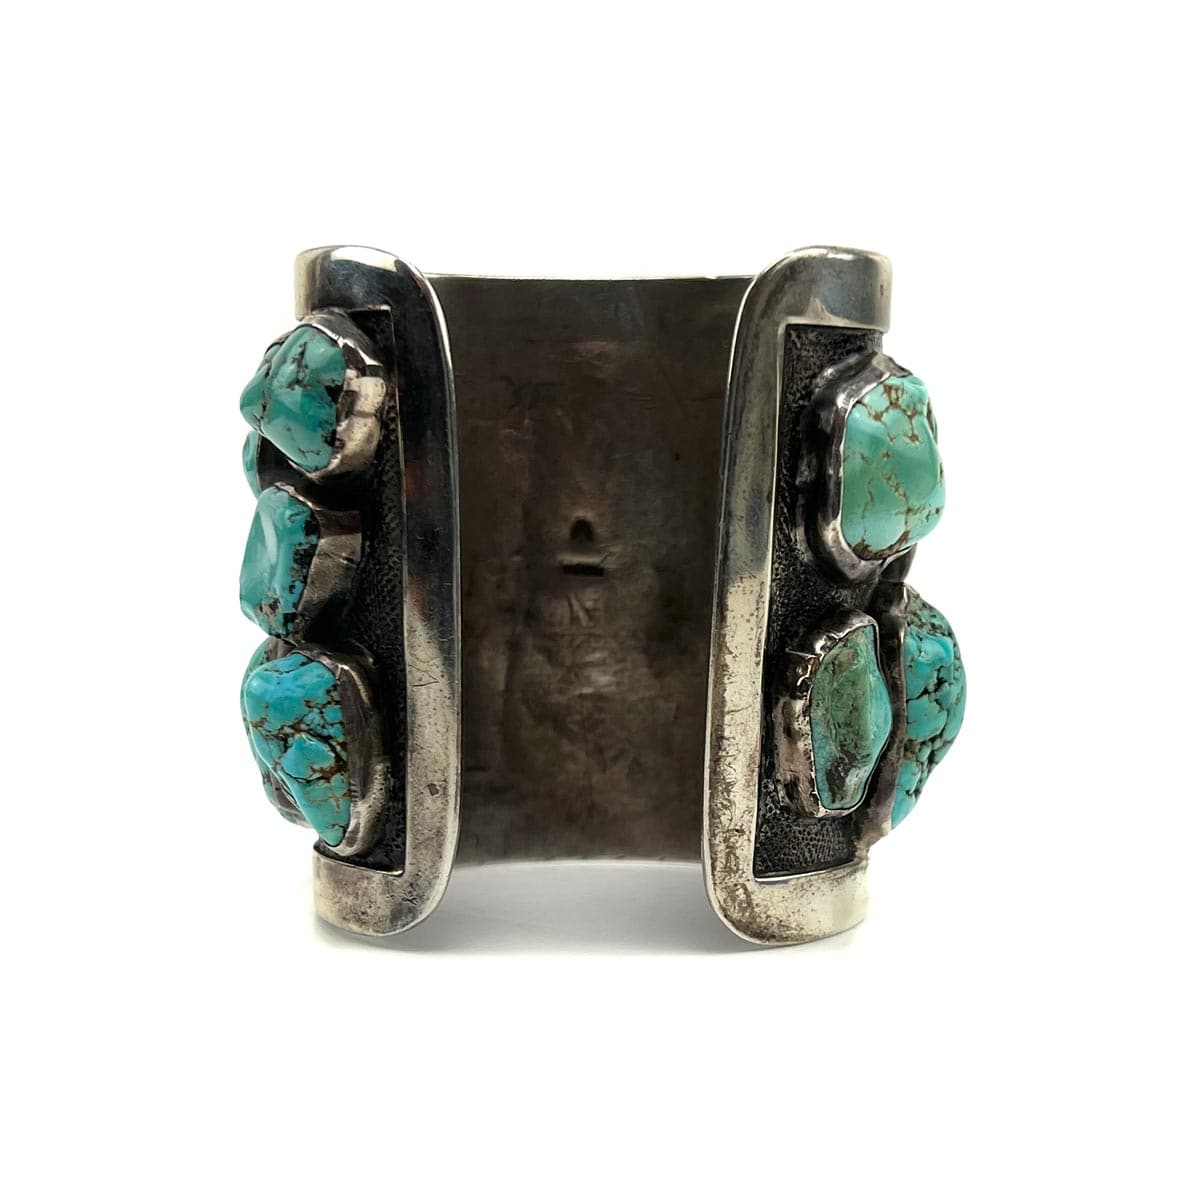 Patania Thunderbird Shop - Turquoise Nugget and Sterling Silver Bracelet c. 1950s, size 6.5 (J90370-0123-001)2
